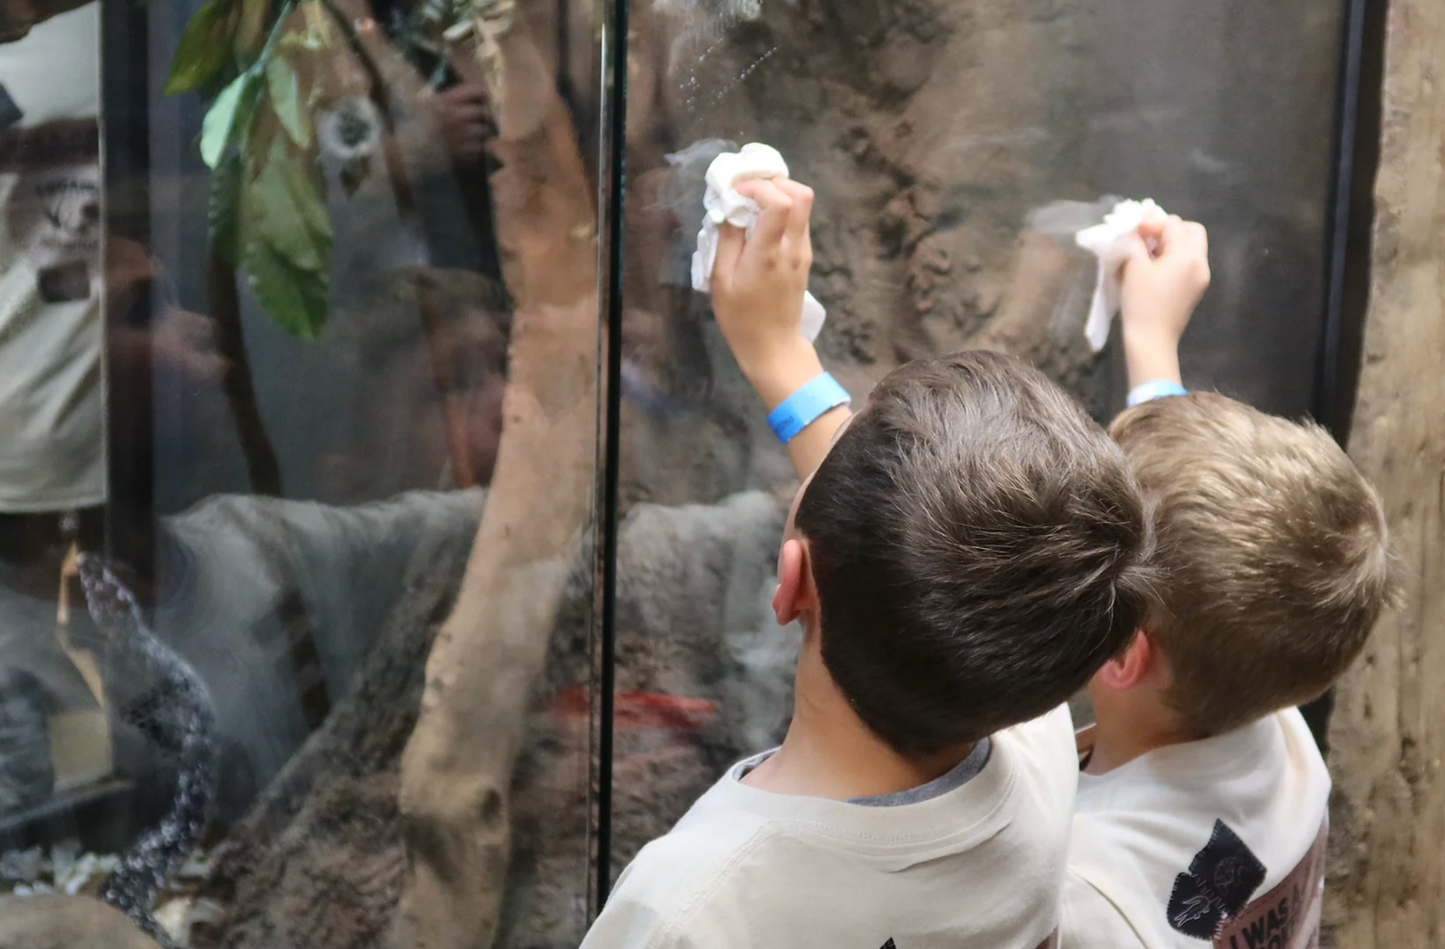 Junior Zookeeper Day at The Reptarium - Wednesday, March 20th- 5:30 PM - 7:30 PM